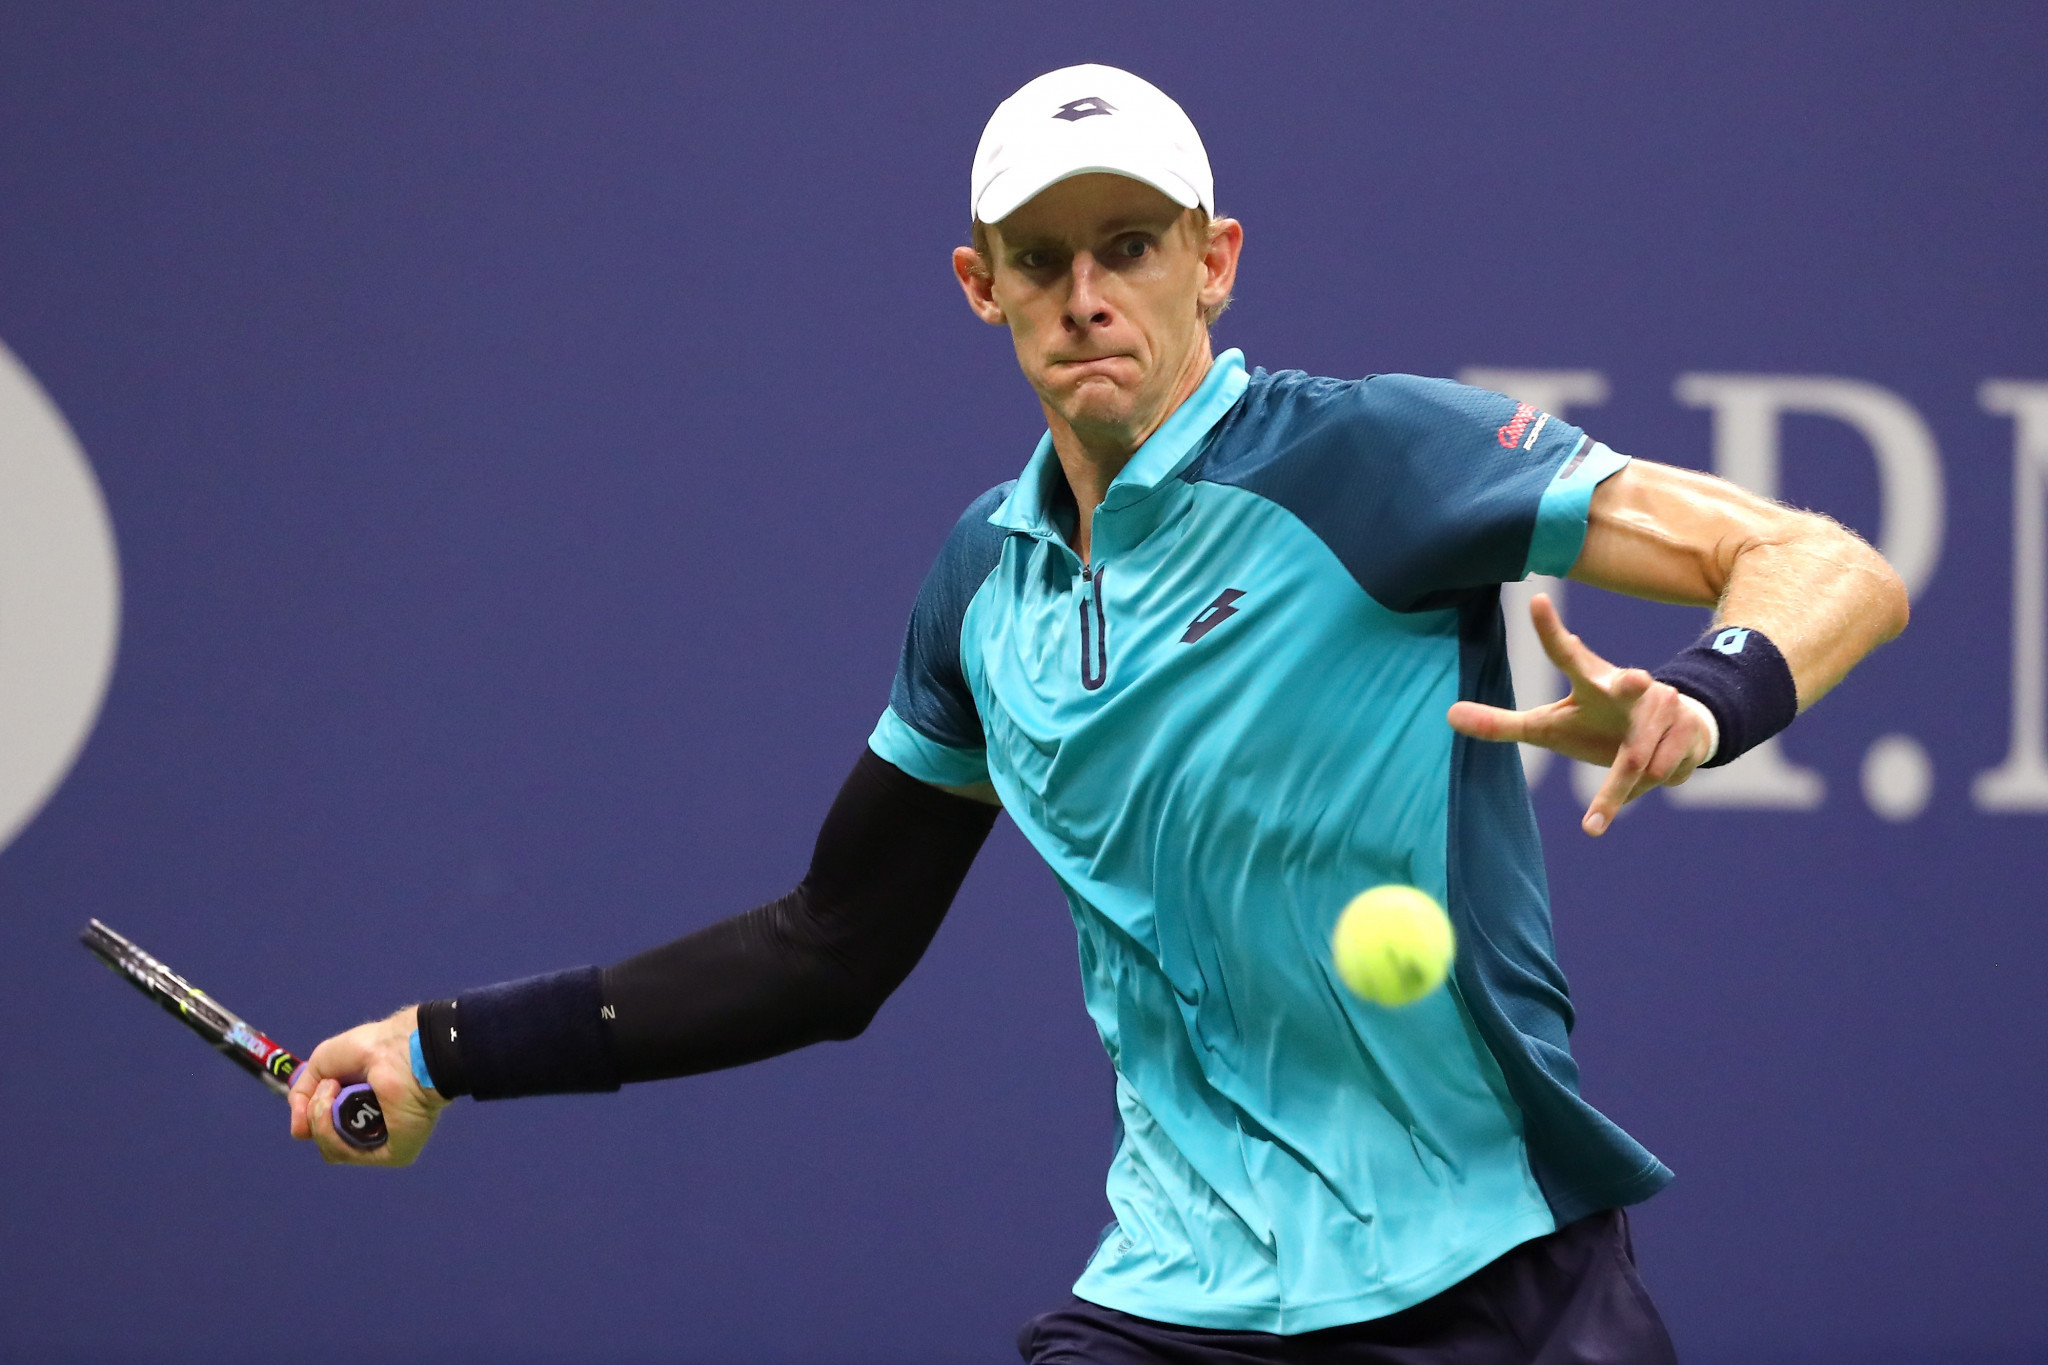 Kevin Anderson defeated Spain's Pablo Carreño Busta to become South Africa's first Grand Slam singles finalist in more than 30 years ©Getty Images